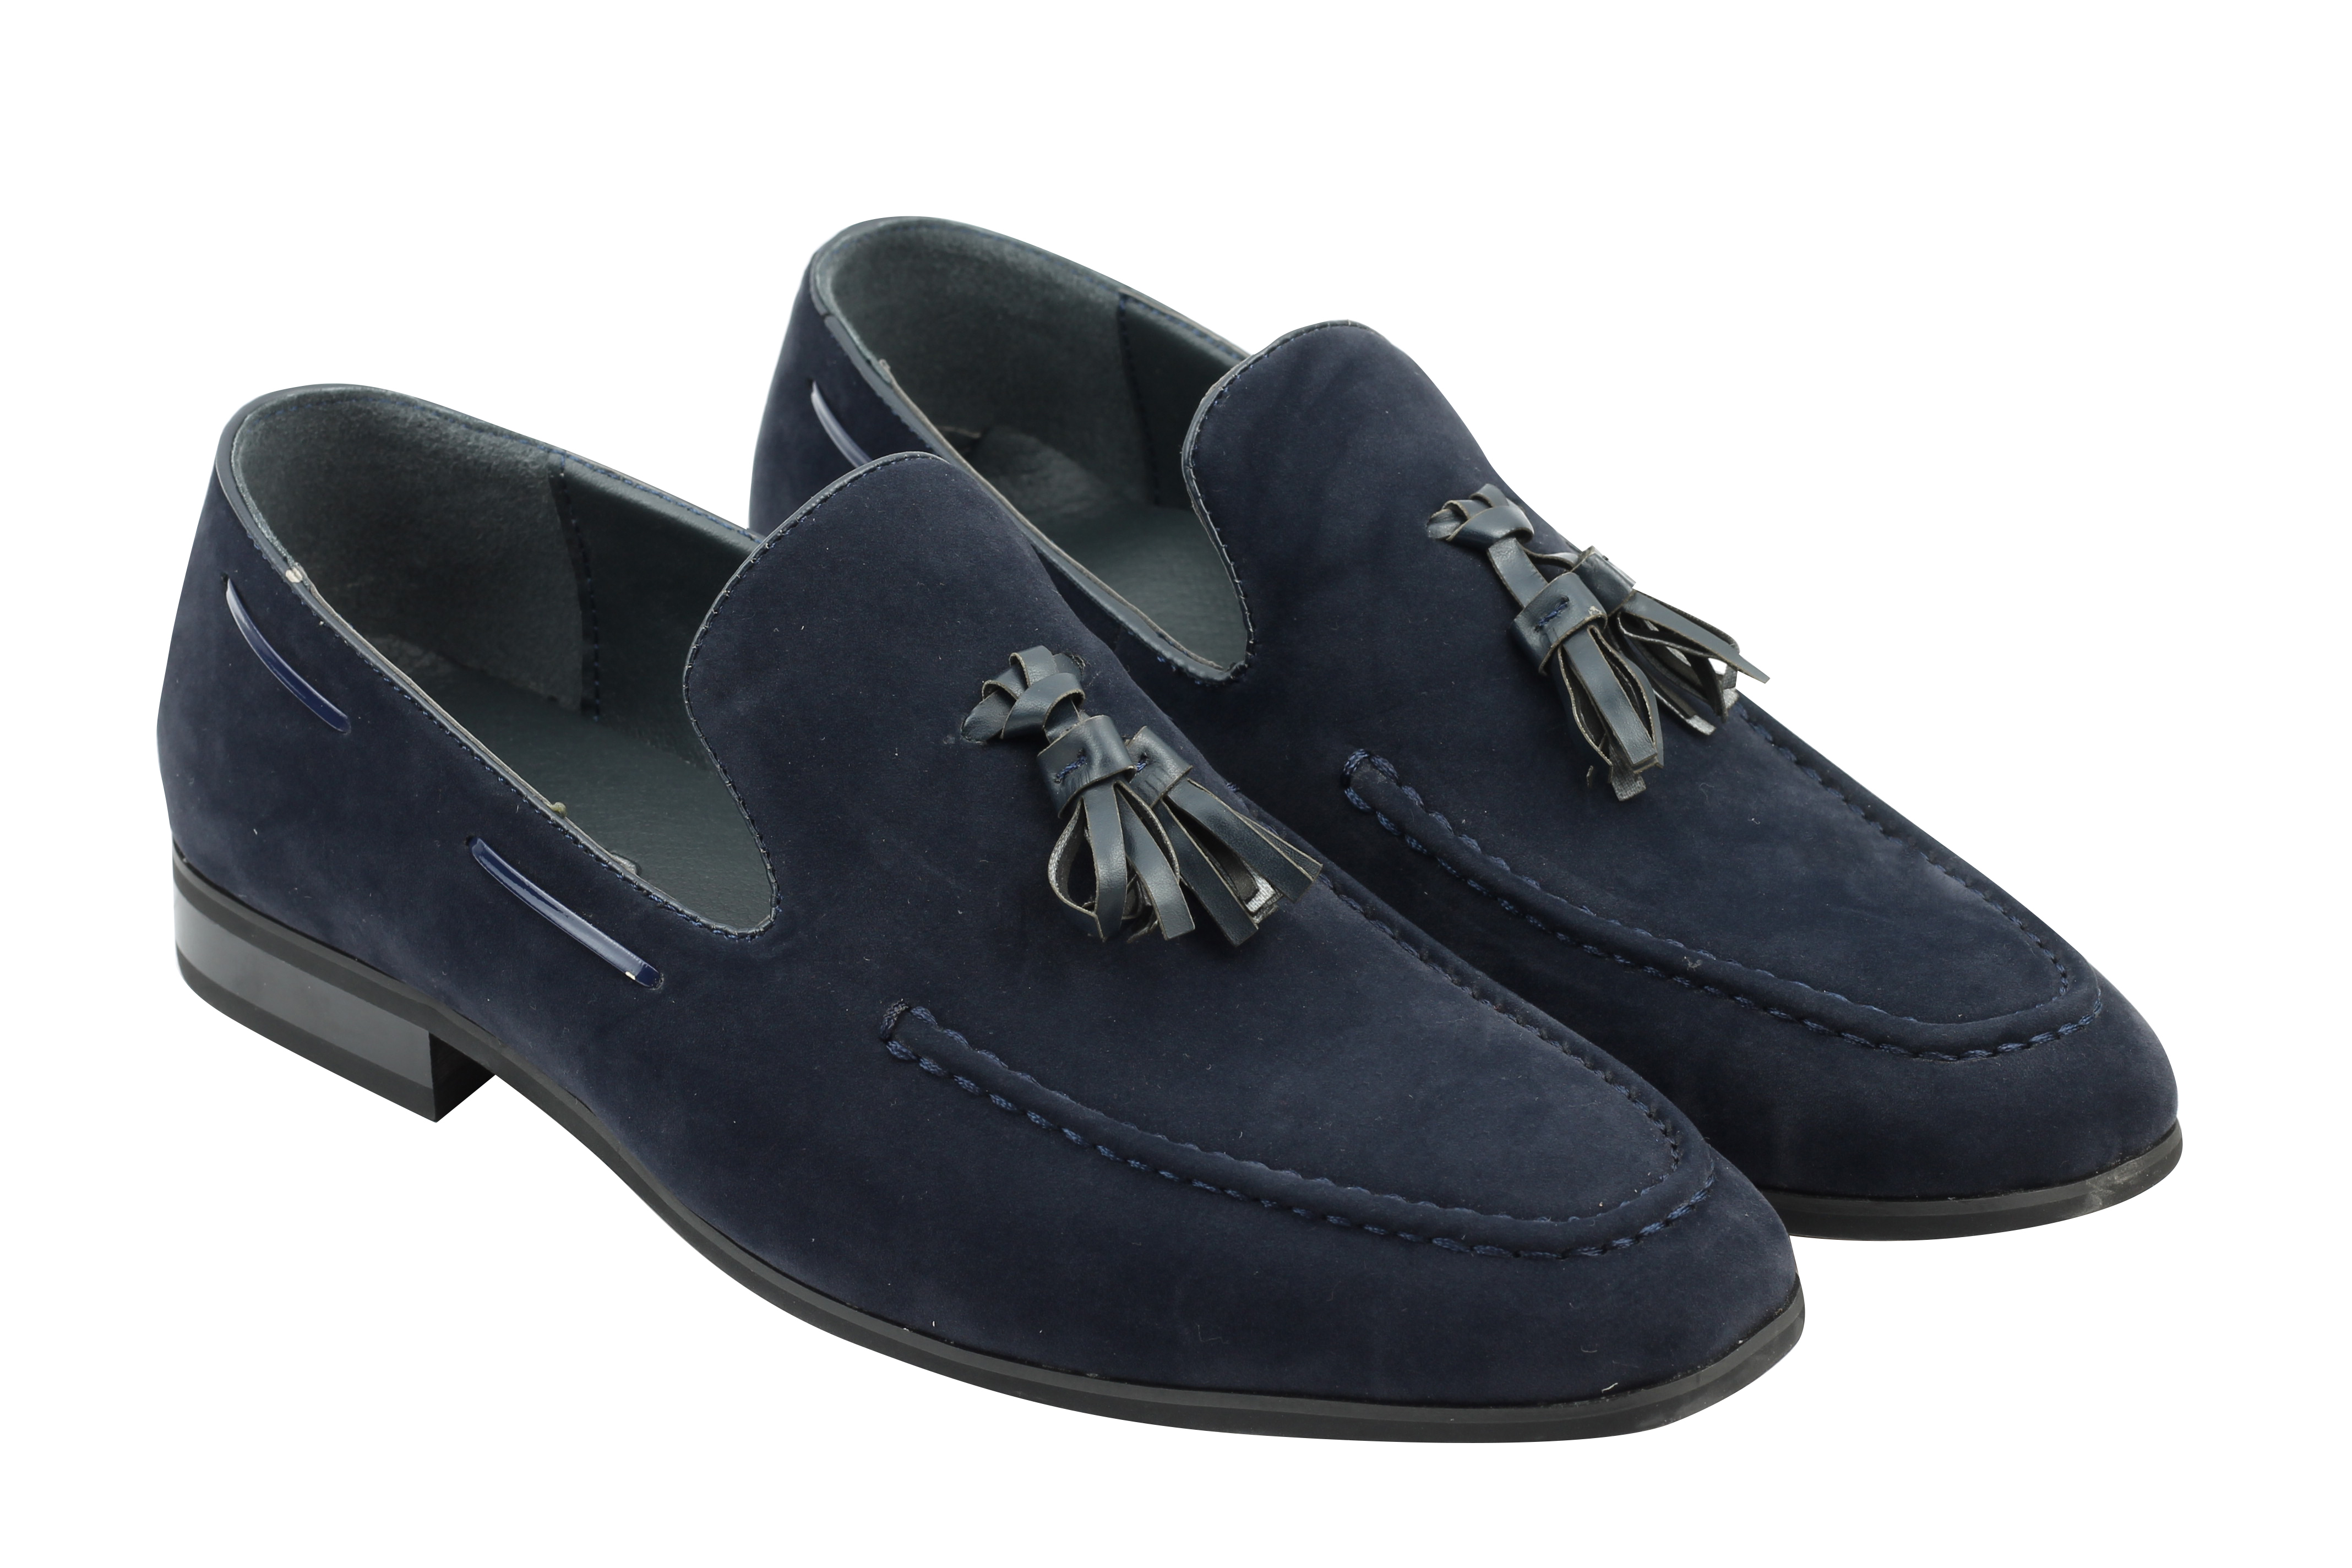 New Mens Faux Suede Leather Tassel Loafers Smart Driving Slip on Shoes ...